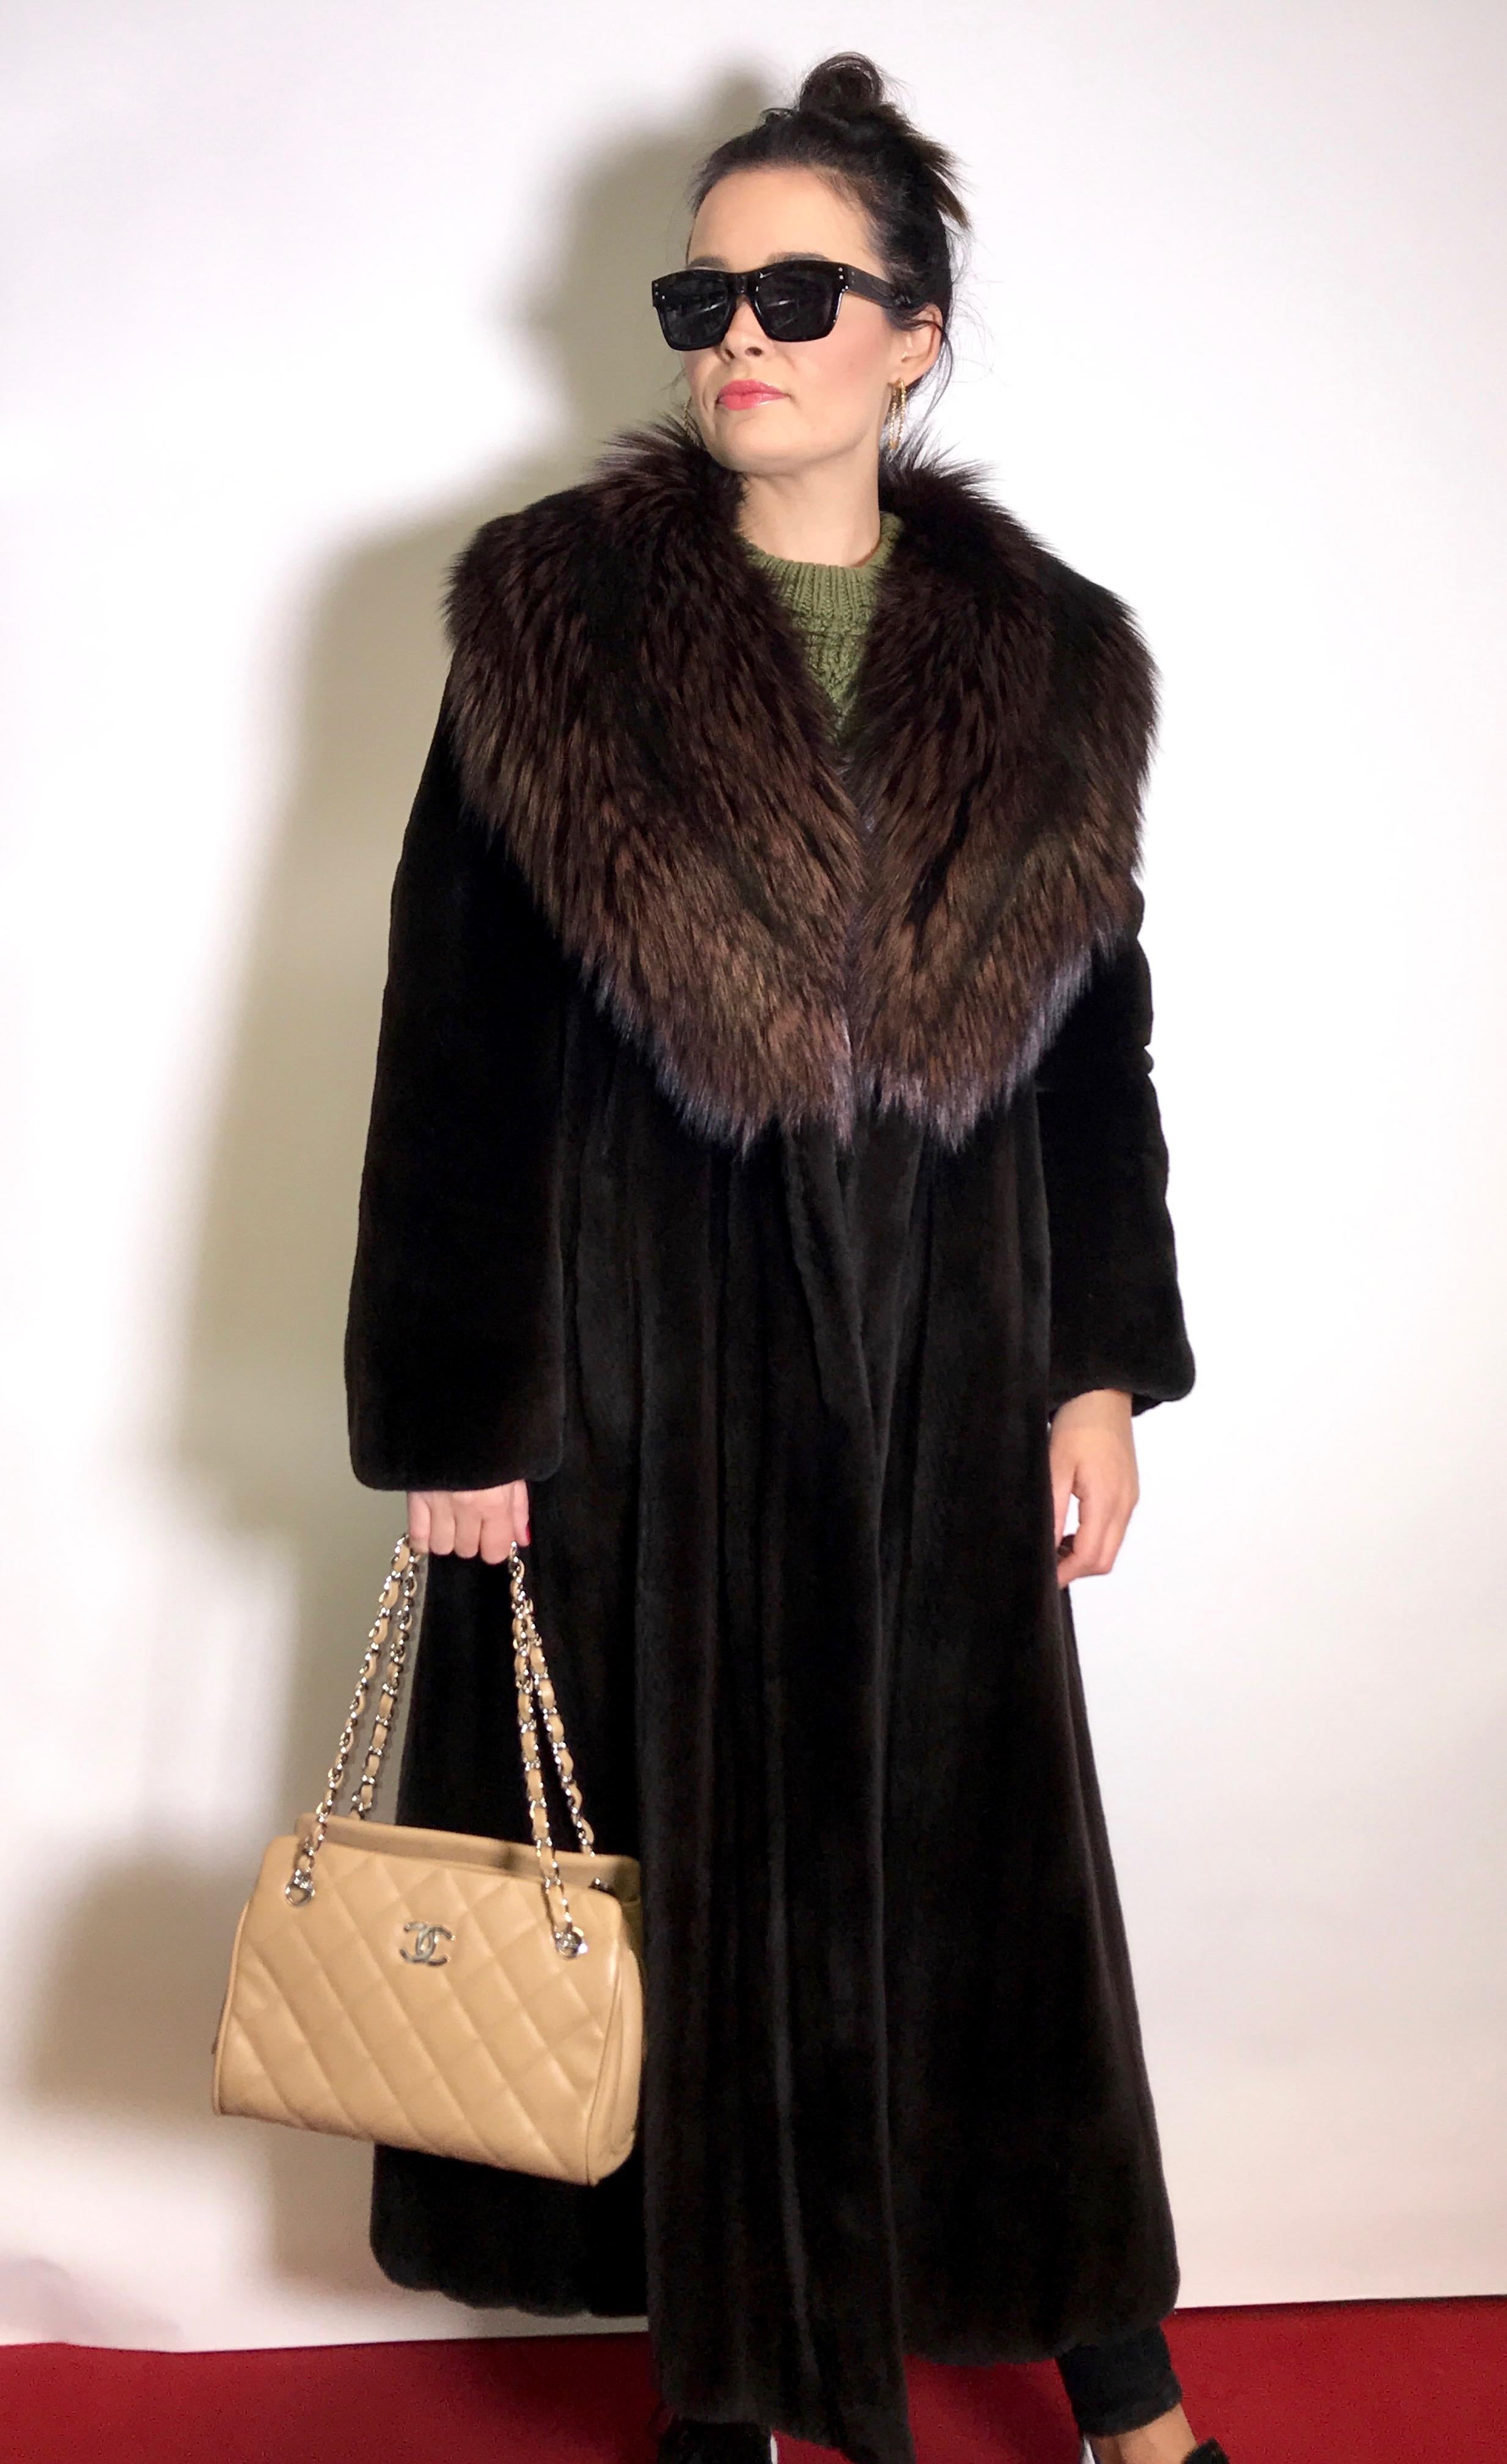 Long sheared silk mink coat with big colored silver fox collar.
Exclusively made by the furrier.

Size EU: 38 / S-M
Total length: 130 cm
Shoulder width: 42 cm
Sleeve length: 60 cm

The coat is in excellent condition, almost never worn.

- Our model